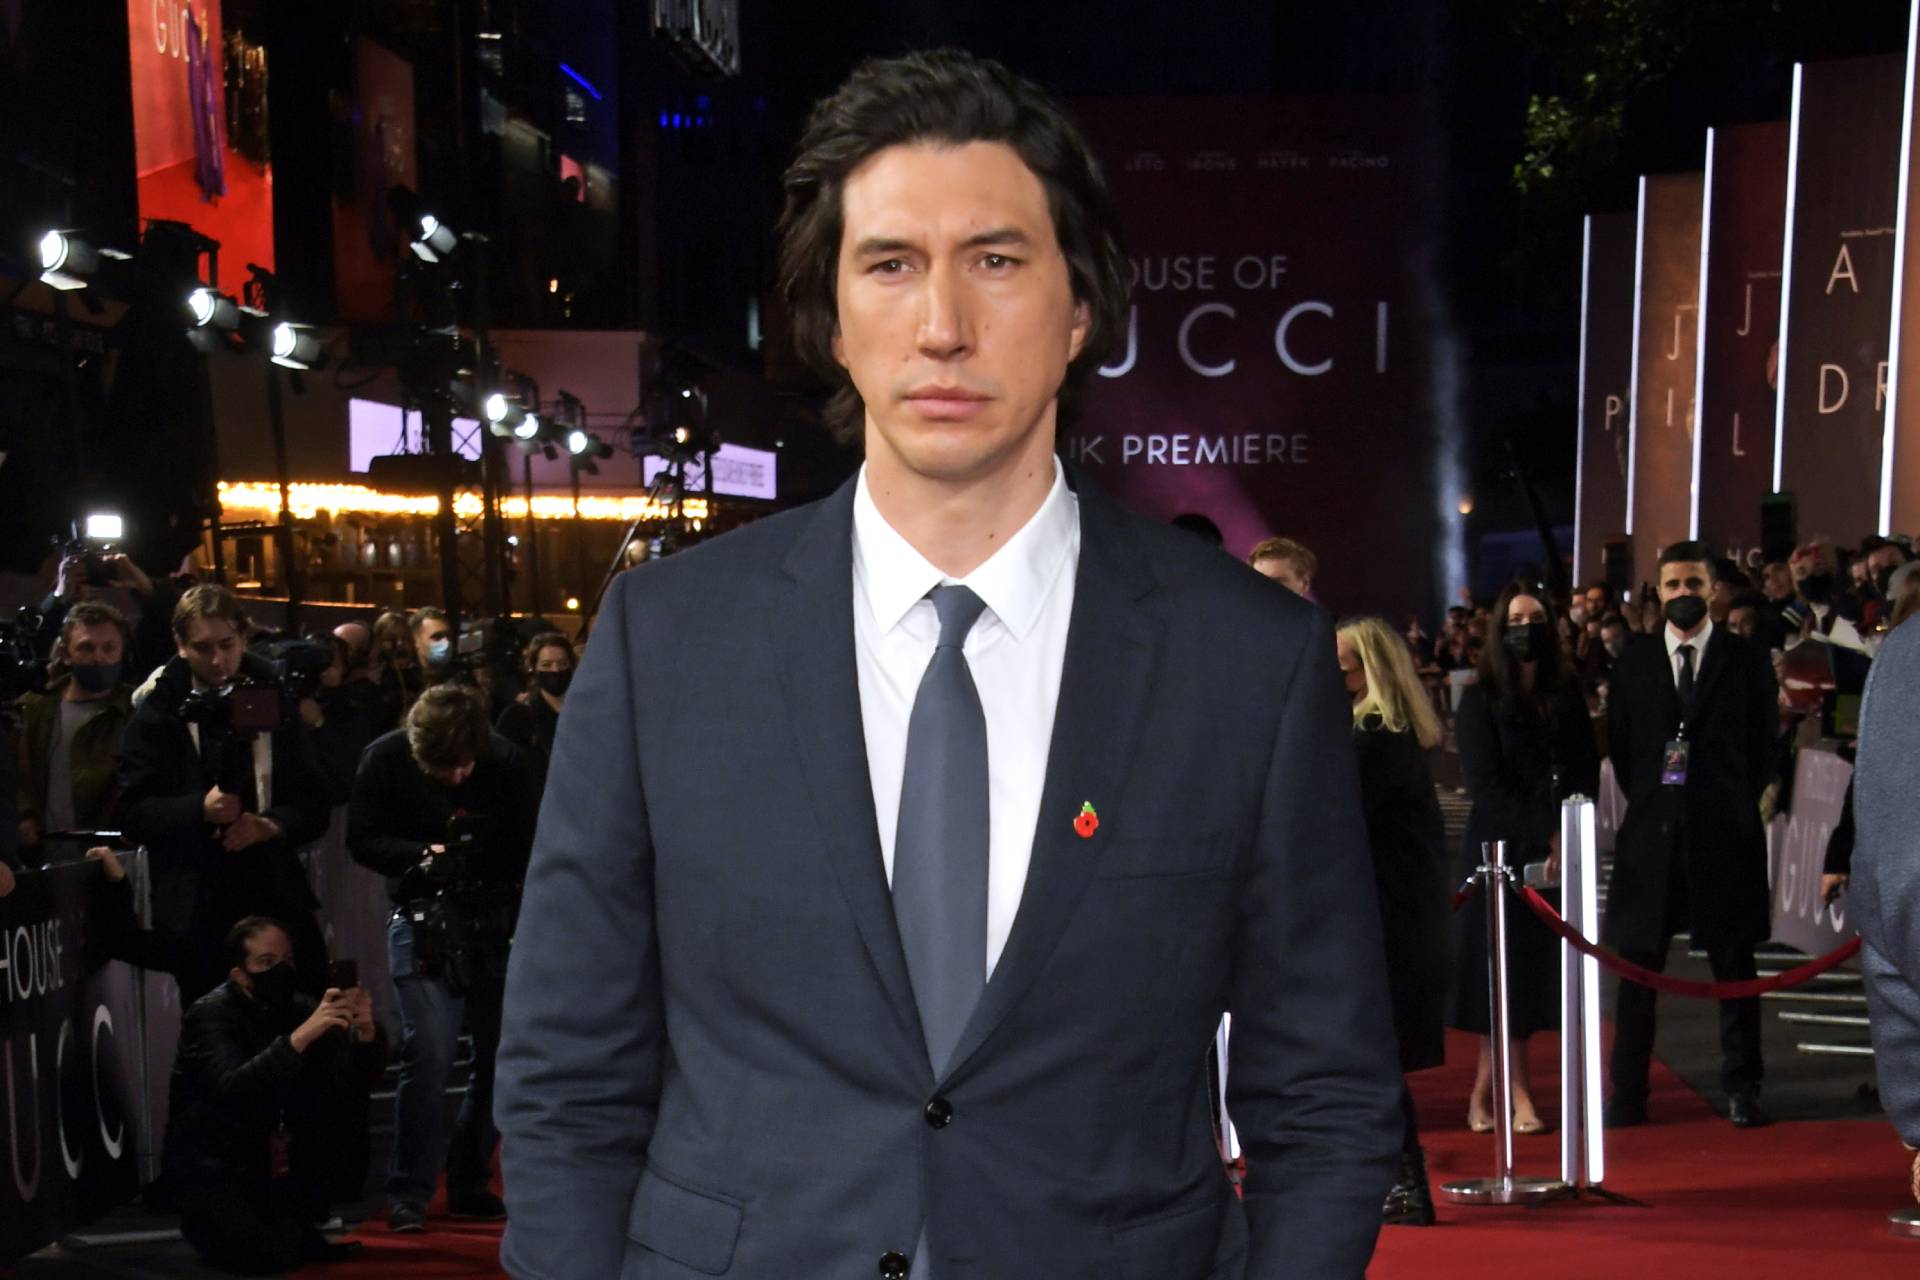 Adam Driver's suit at House of premiere applause - GQ